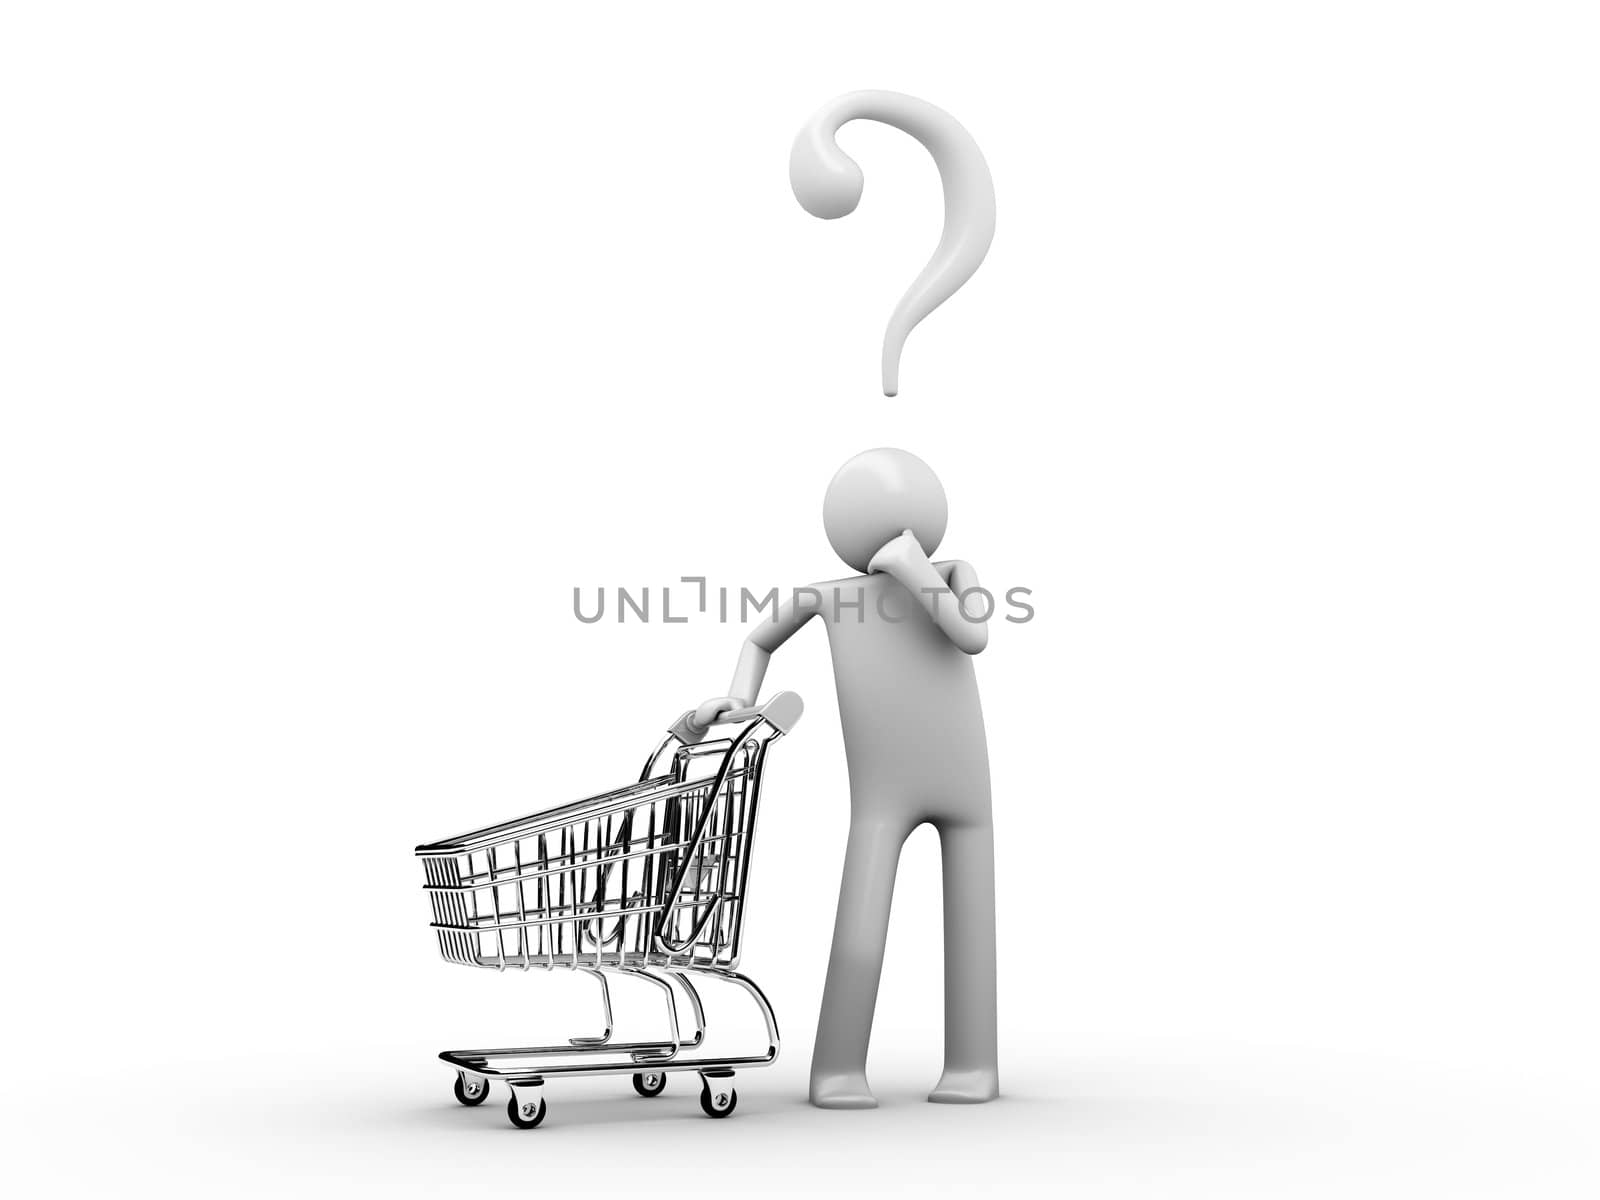 Customer's choise: what do I want to buy today?